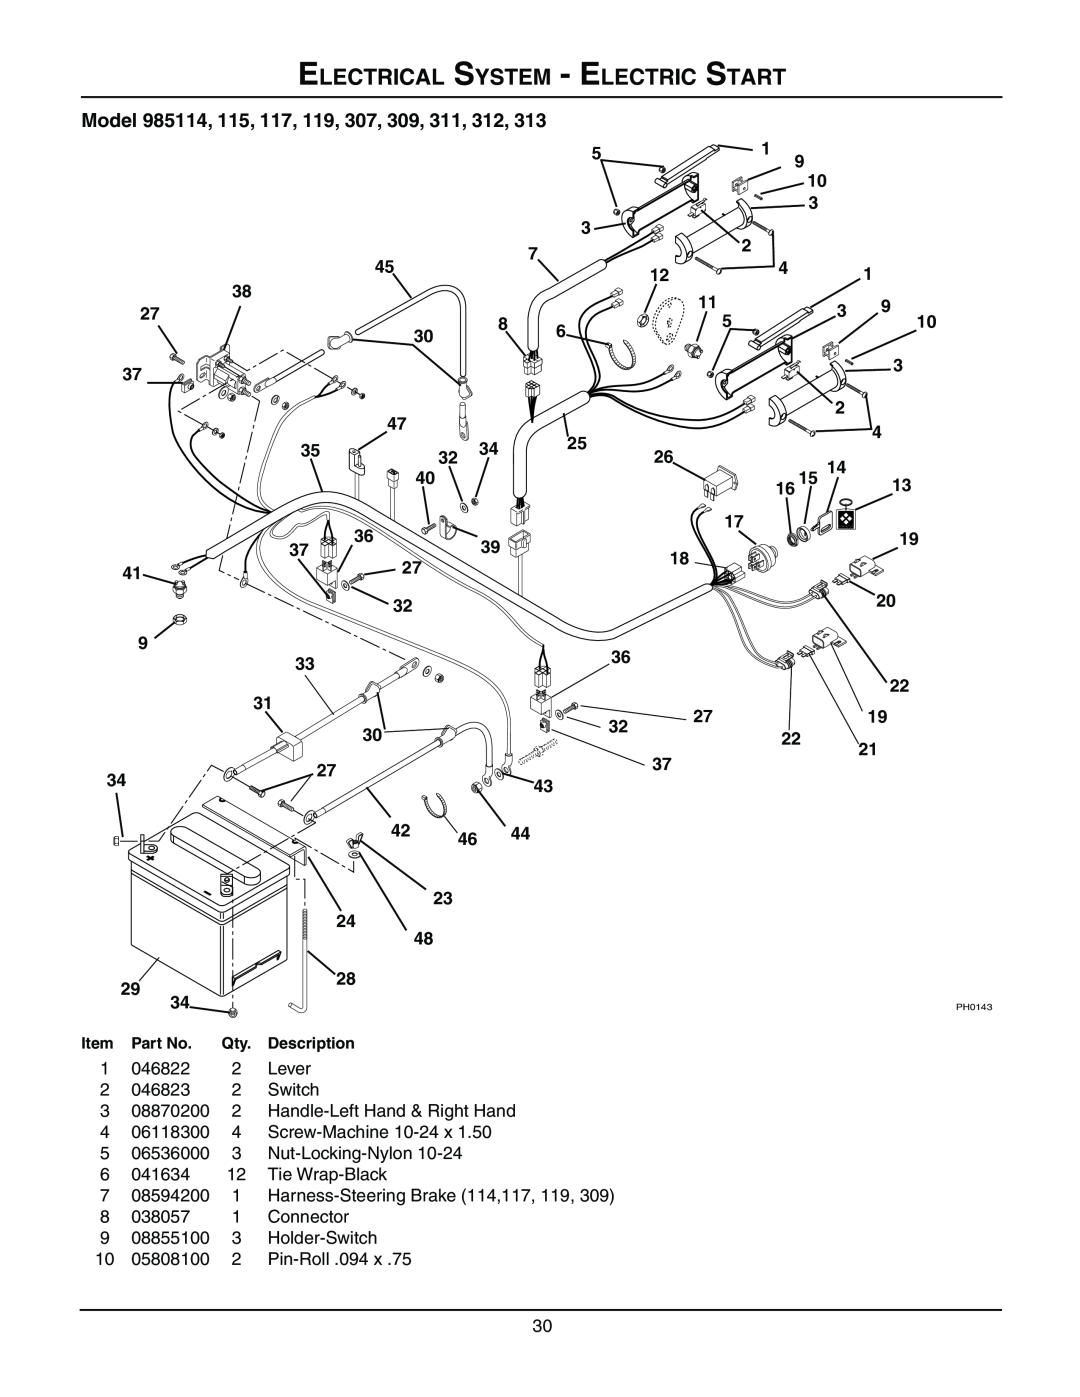 Gravely 985115 manual Electrical System - Electric Start, Model 985114, 115, 117, 119, 307, 309, 311, 312, Item Part No 